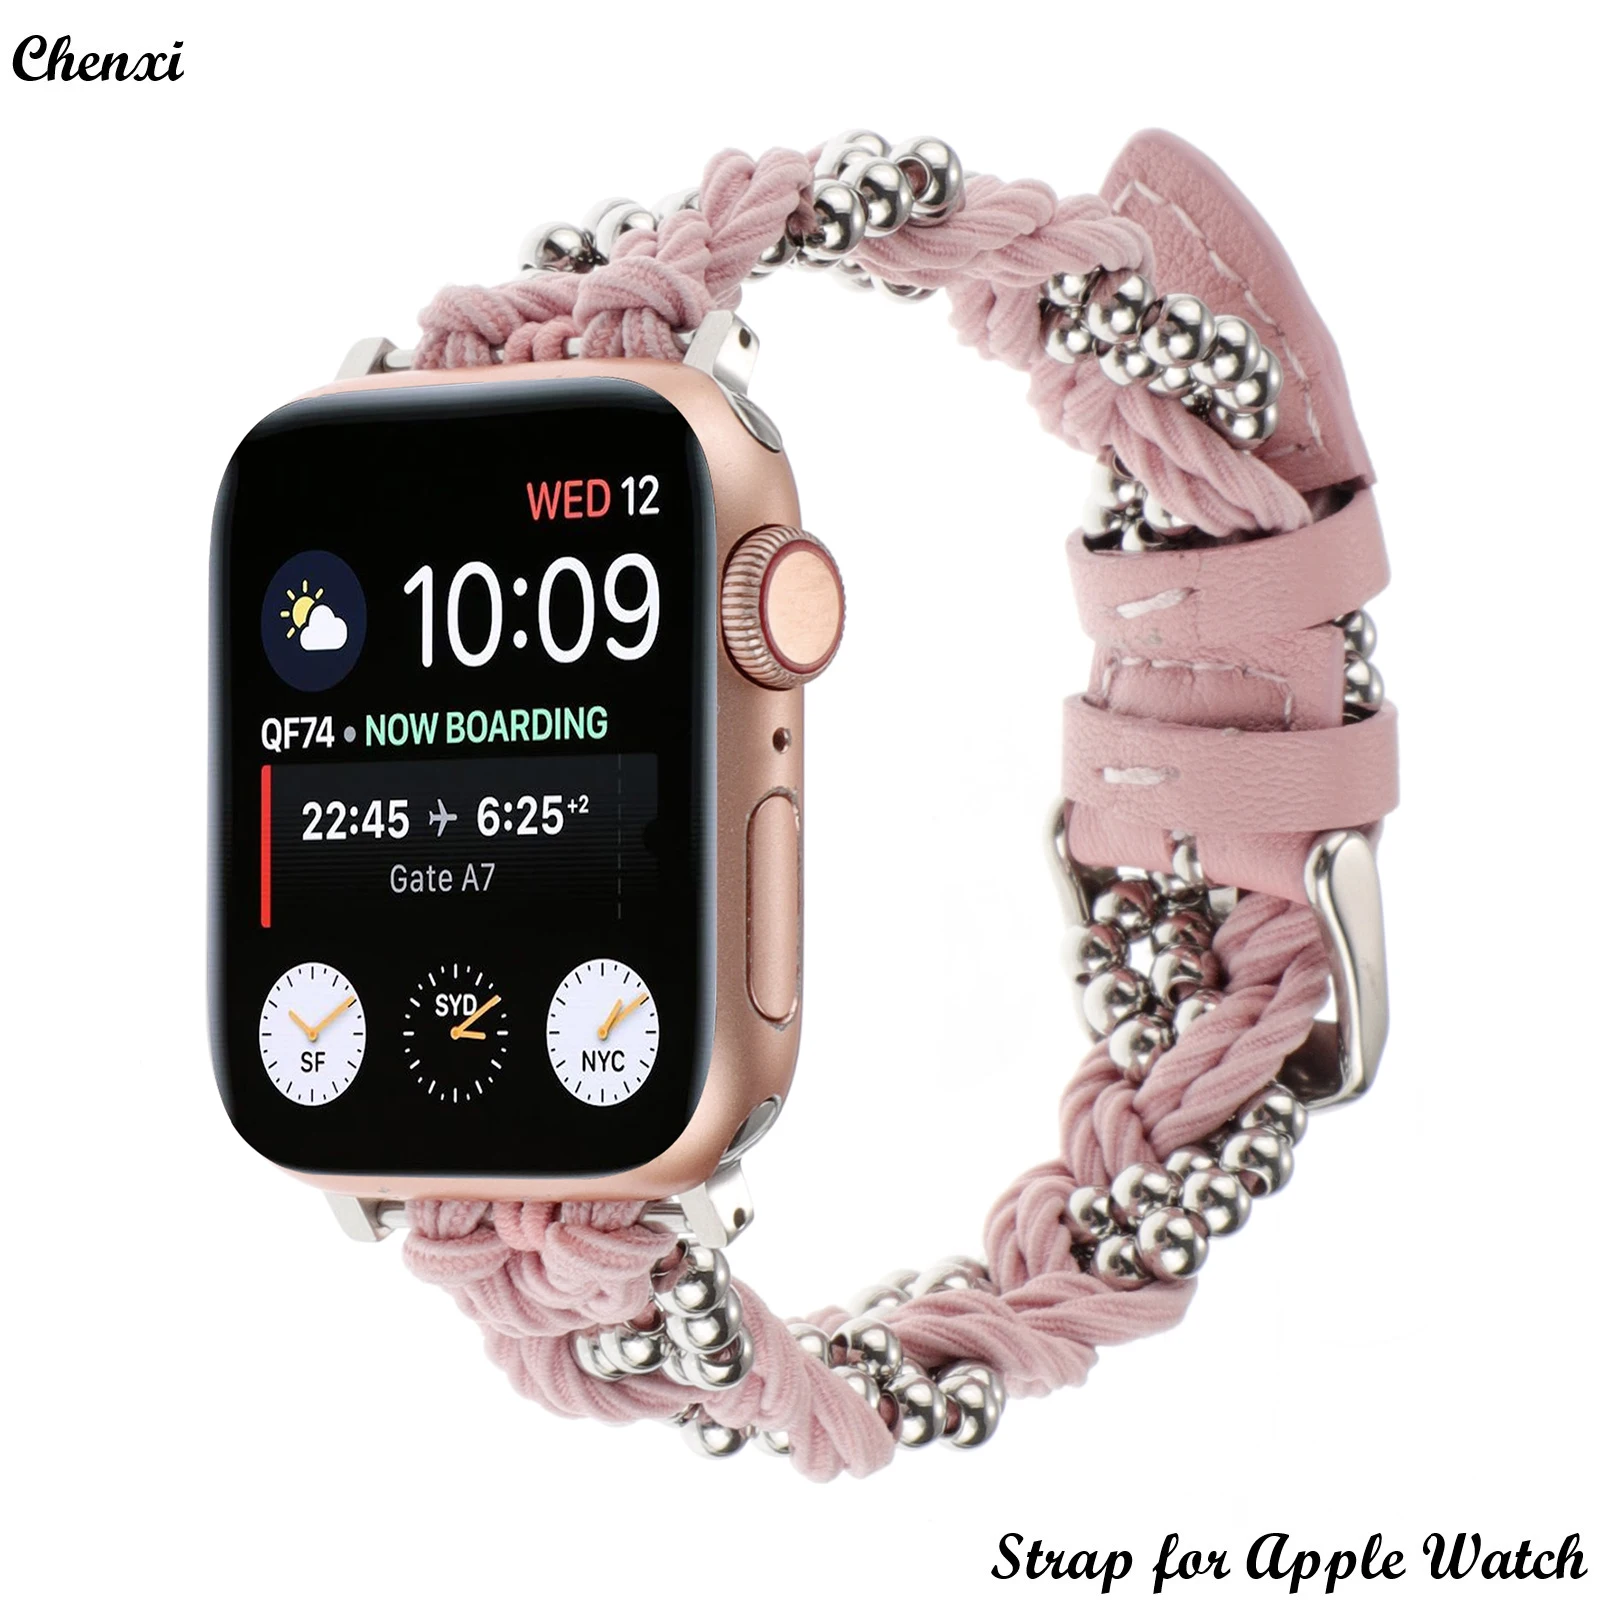 Enlarge Steel bead strap for Apple watch band women Elastic woven chain iwatch87654321SE Ultra38 40 41 42 44 45mm leather sweet wrist